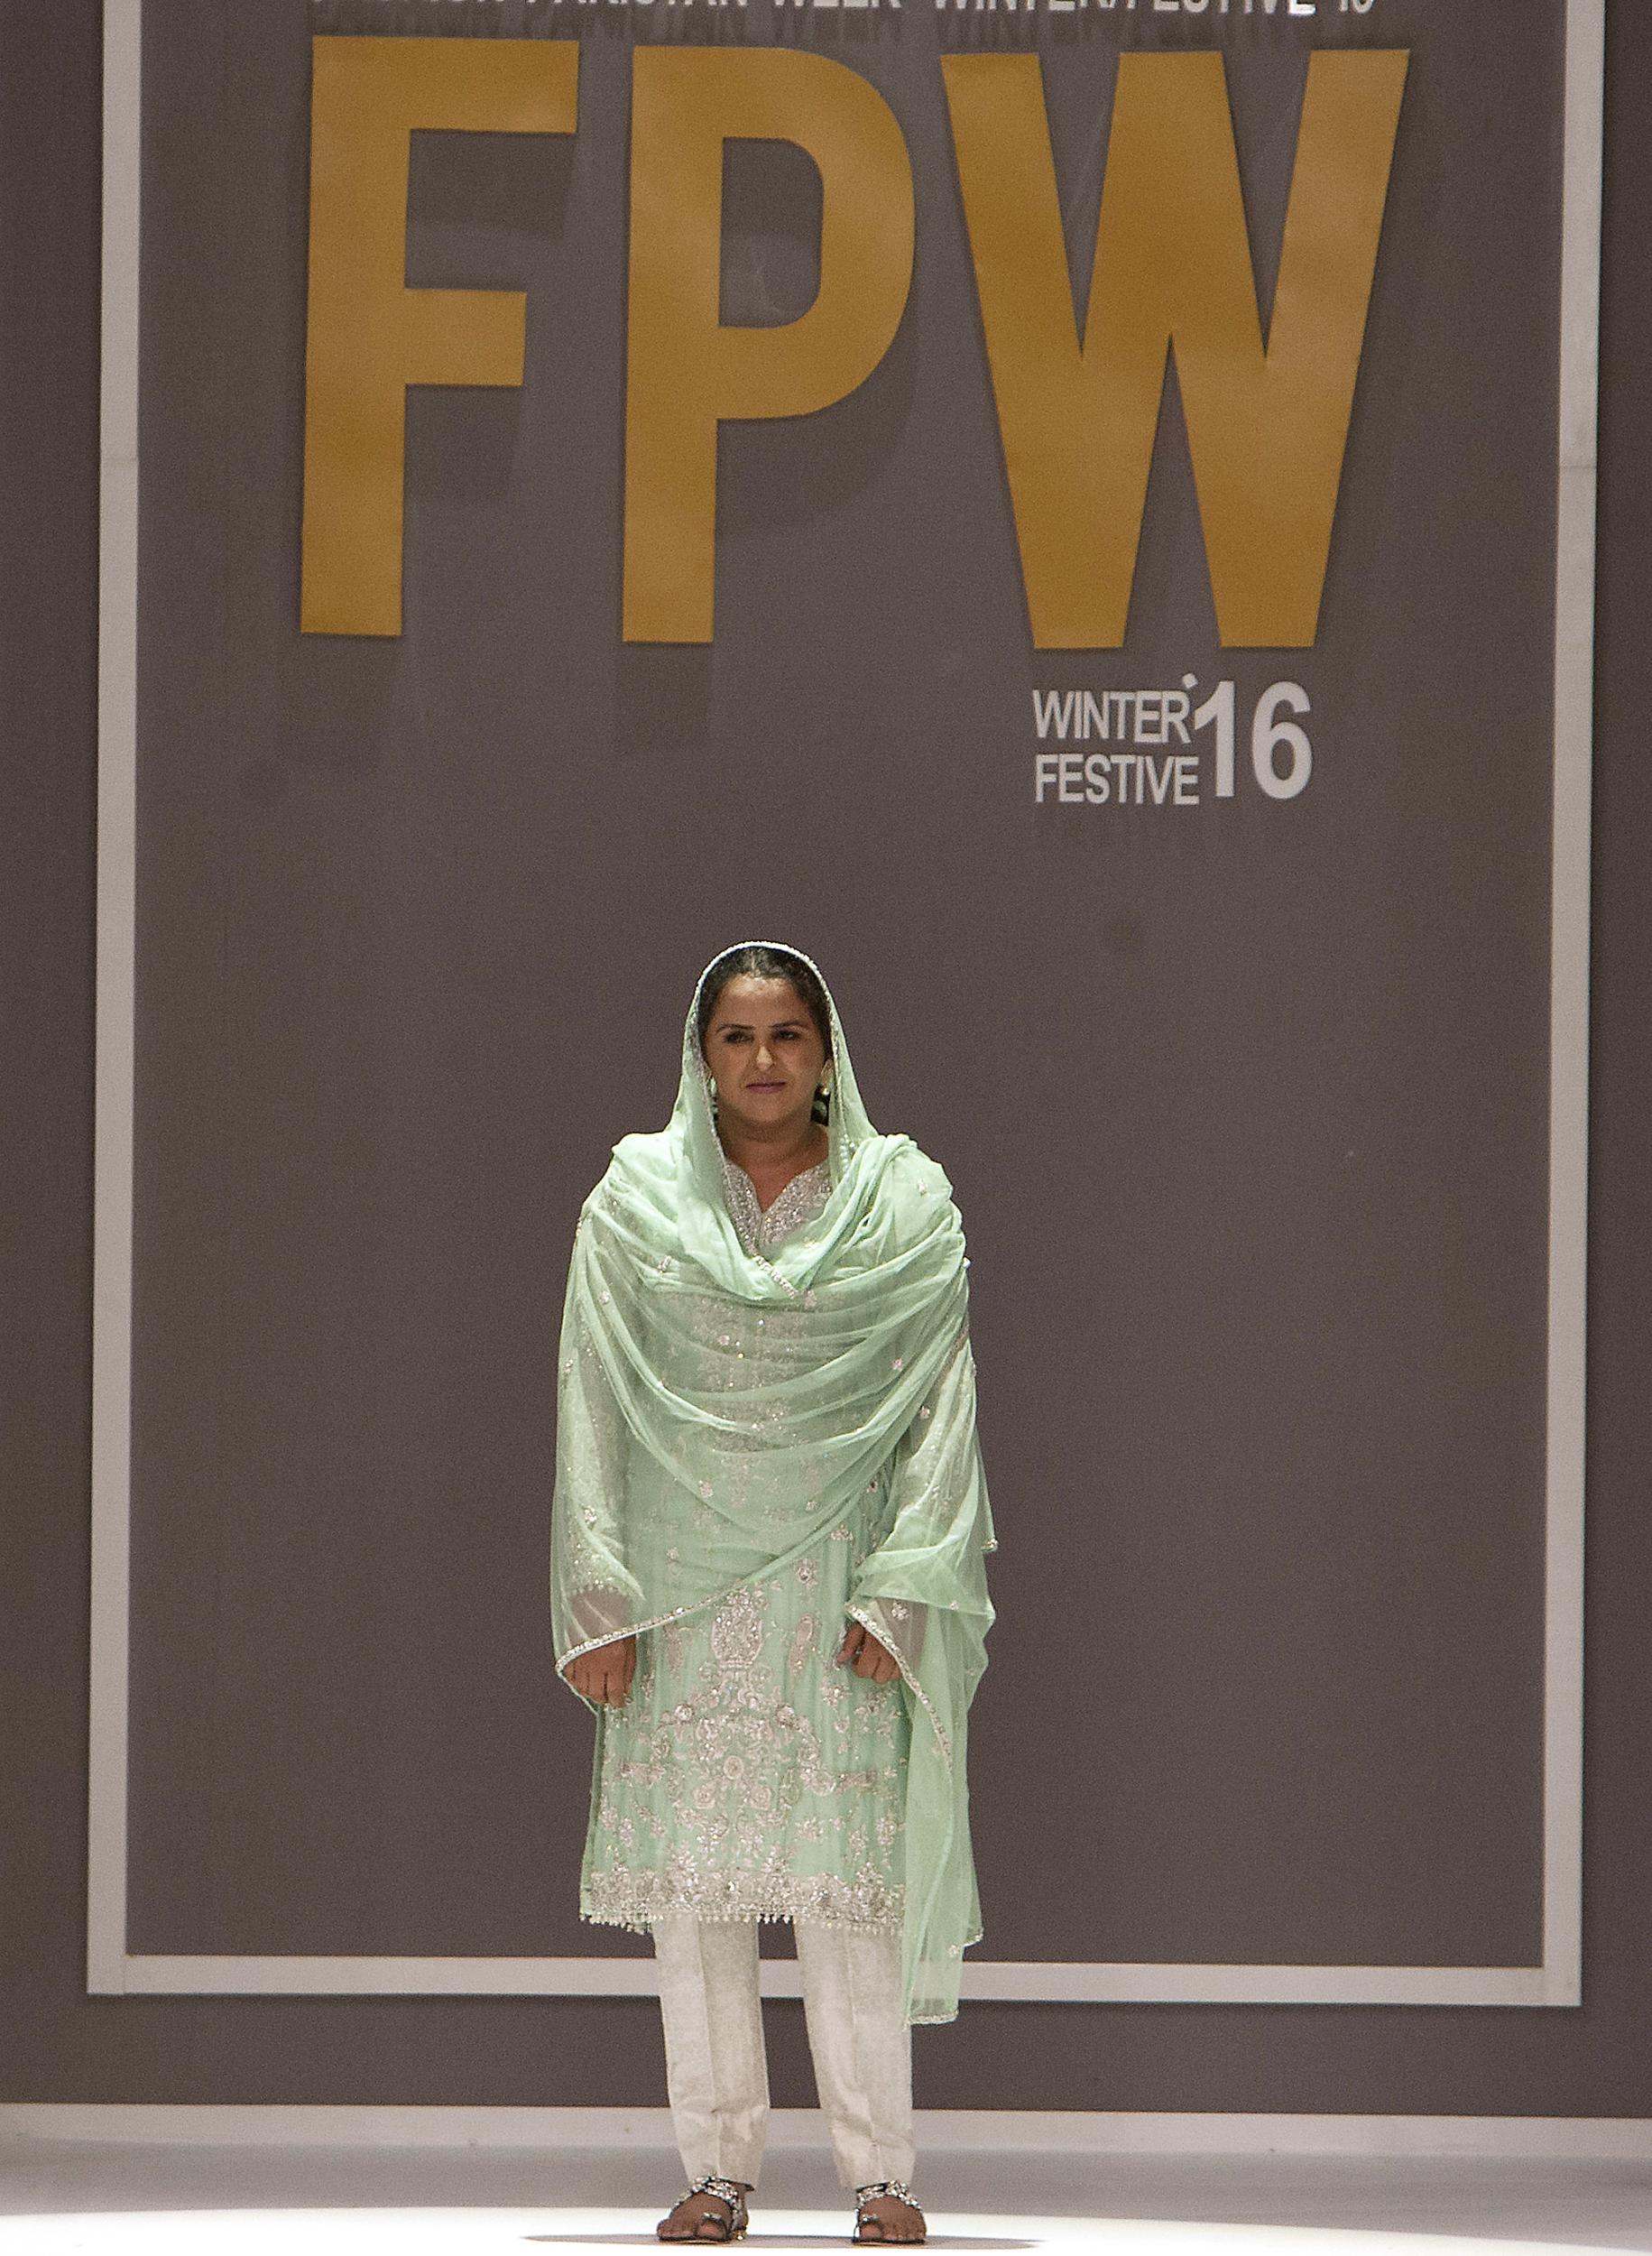 Gang-raped and paraded naked 14-years ago, Mukhtar Mai walked on during Pakistan fashion week on Tuesday